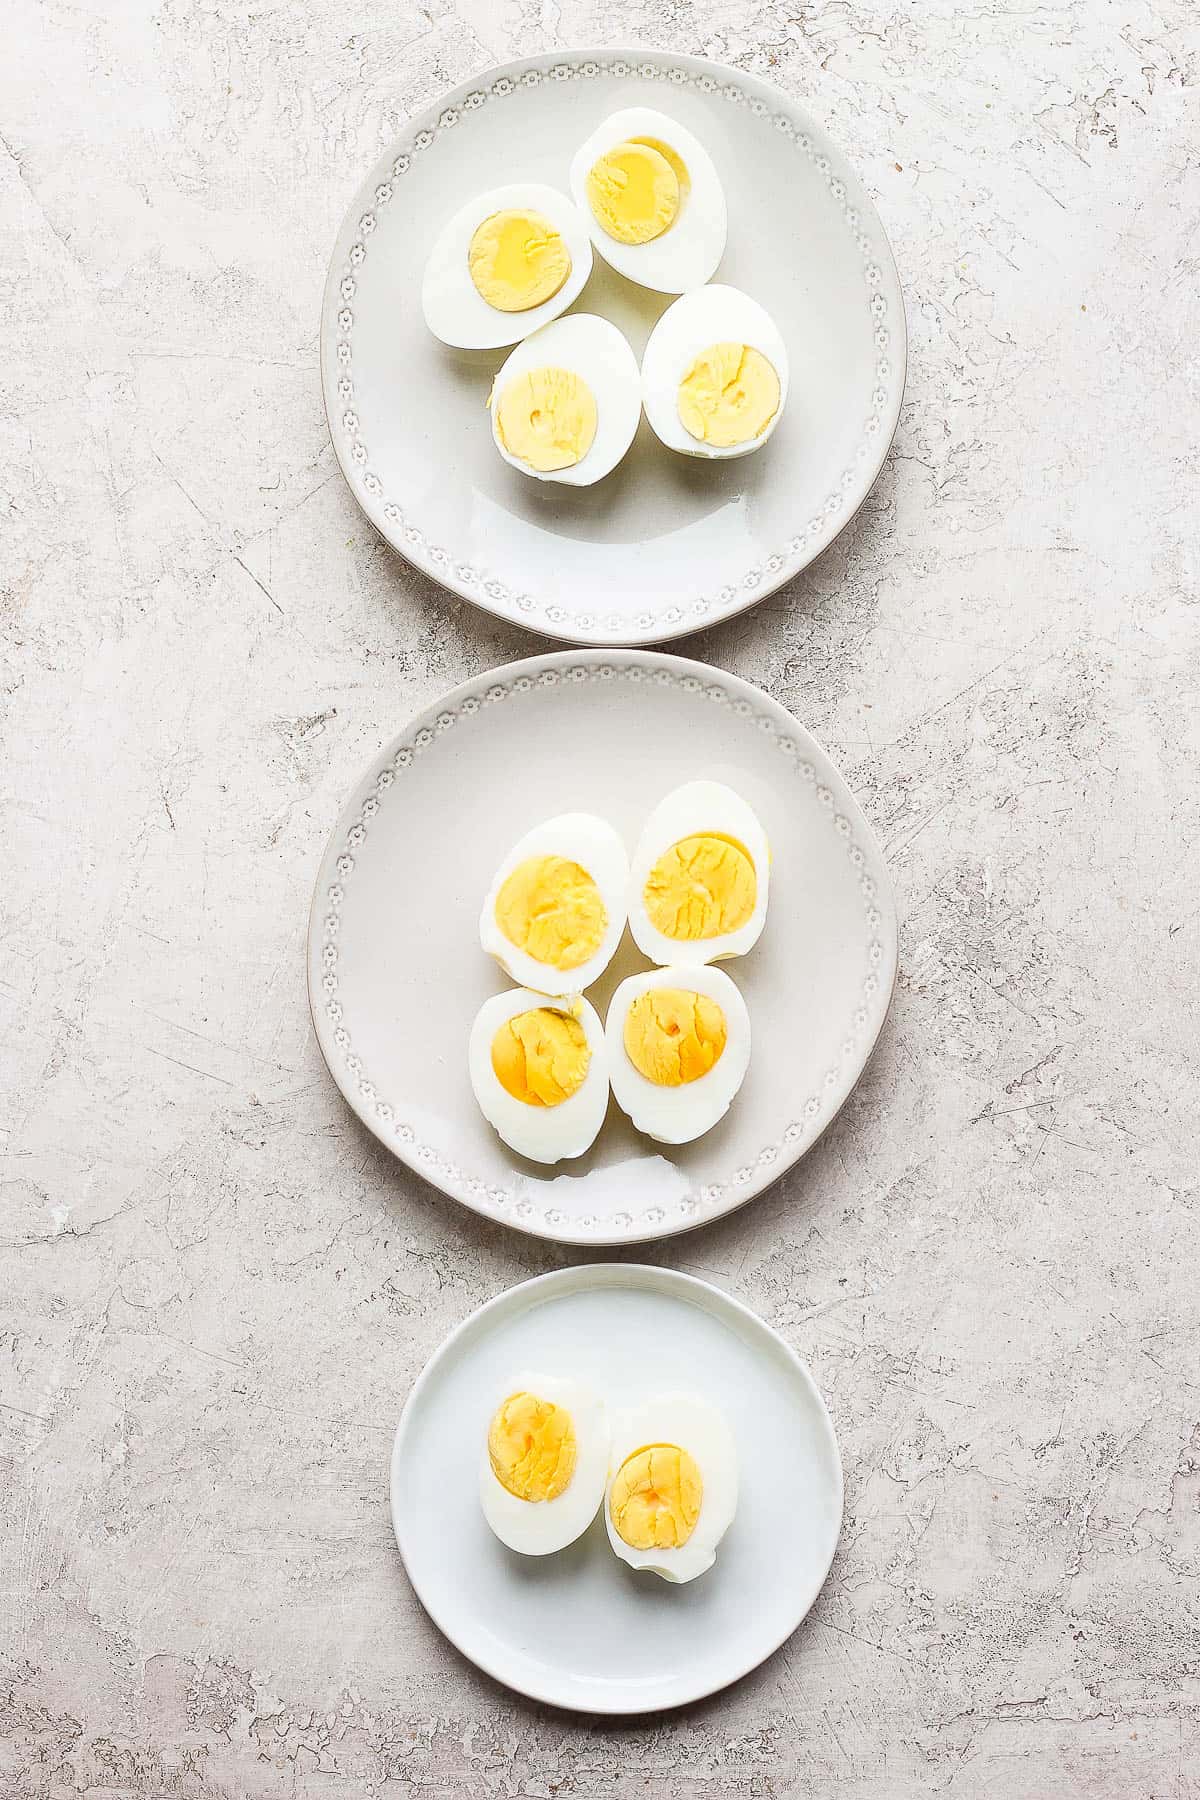 Three plates, each with two hard boiled eggs cut lengthwise, with the yolk side up.